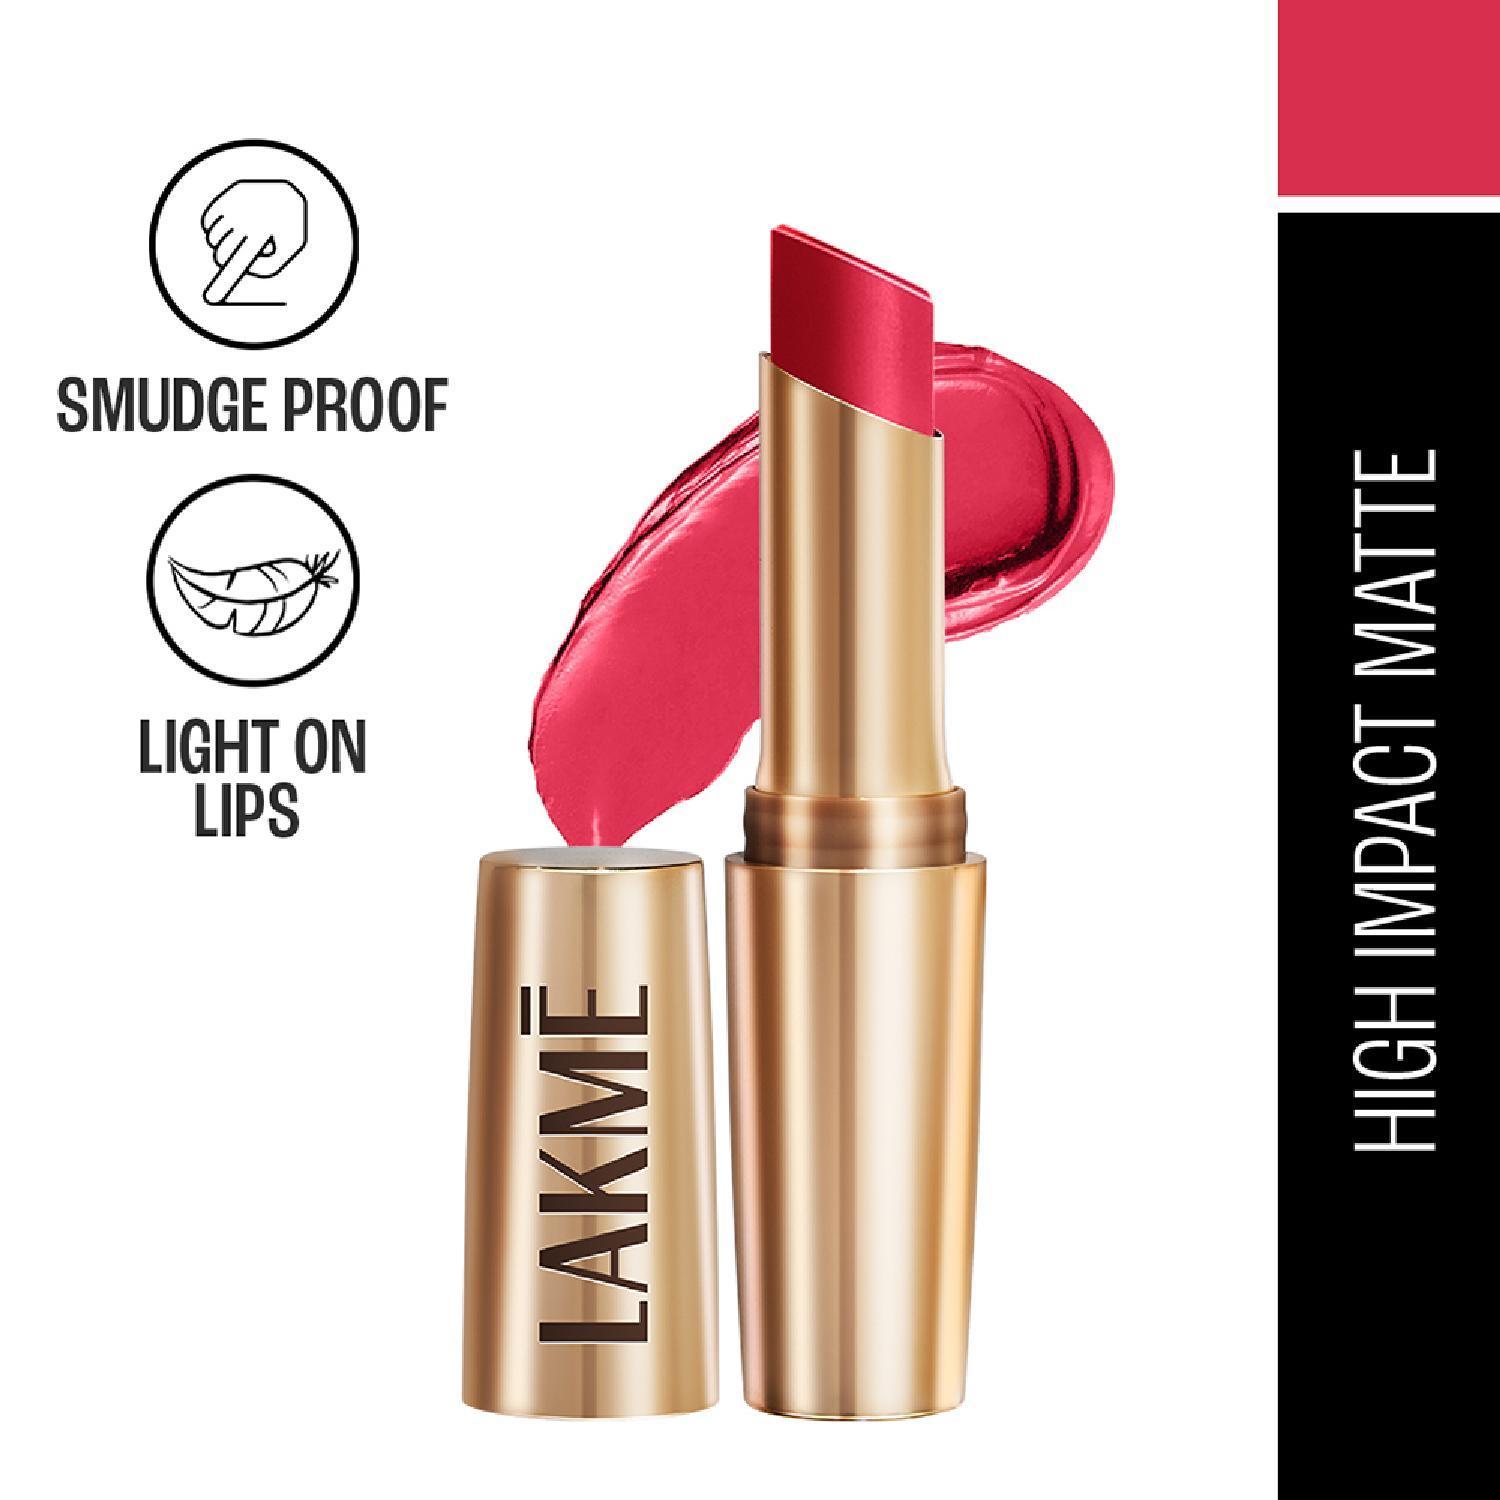 lakme 9 to 5 powerplay priming matte lipstick, lasts 16hrs, ruby rush (3.6g)